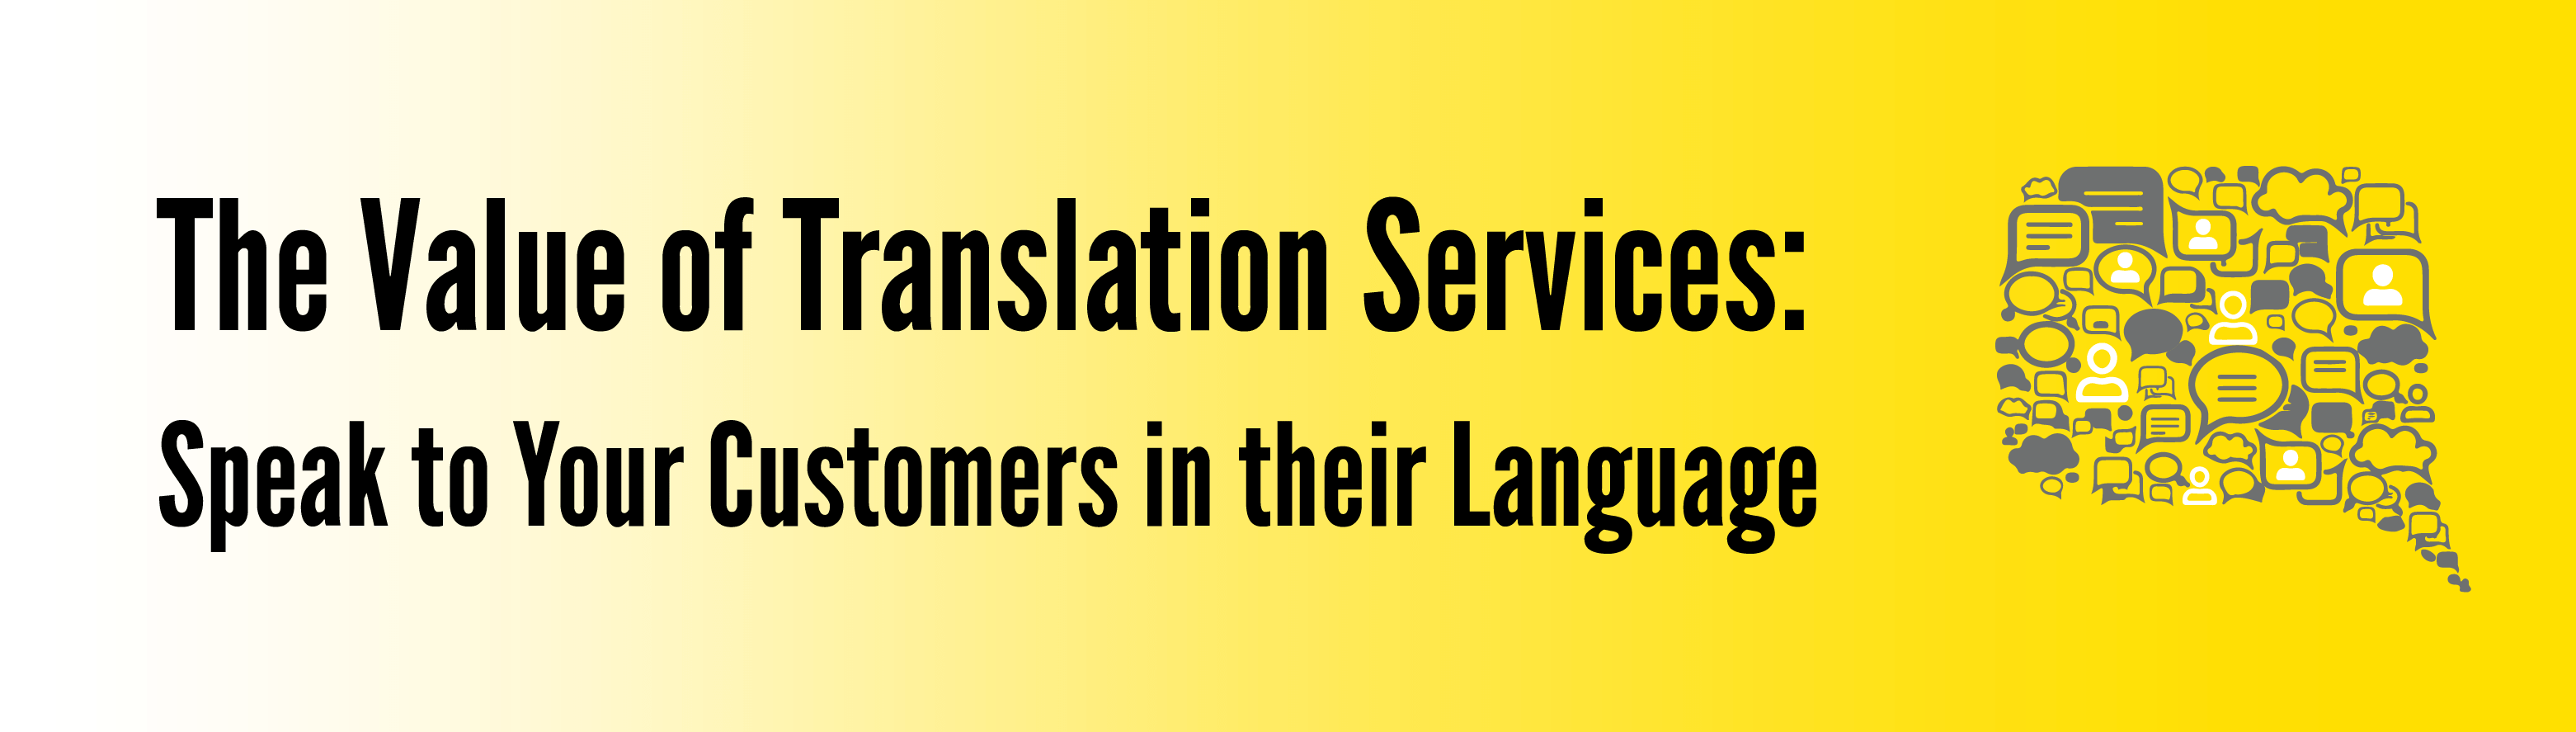 The Value of Translation Services: Speak to Your Customers in their Language